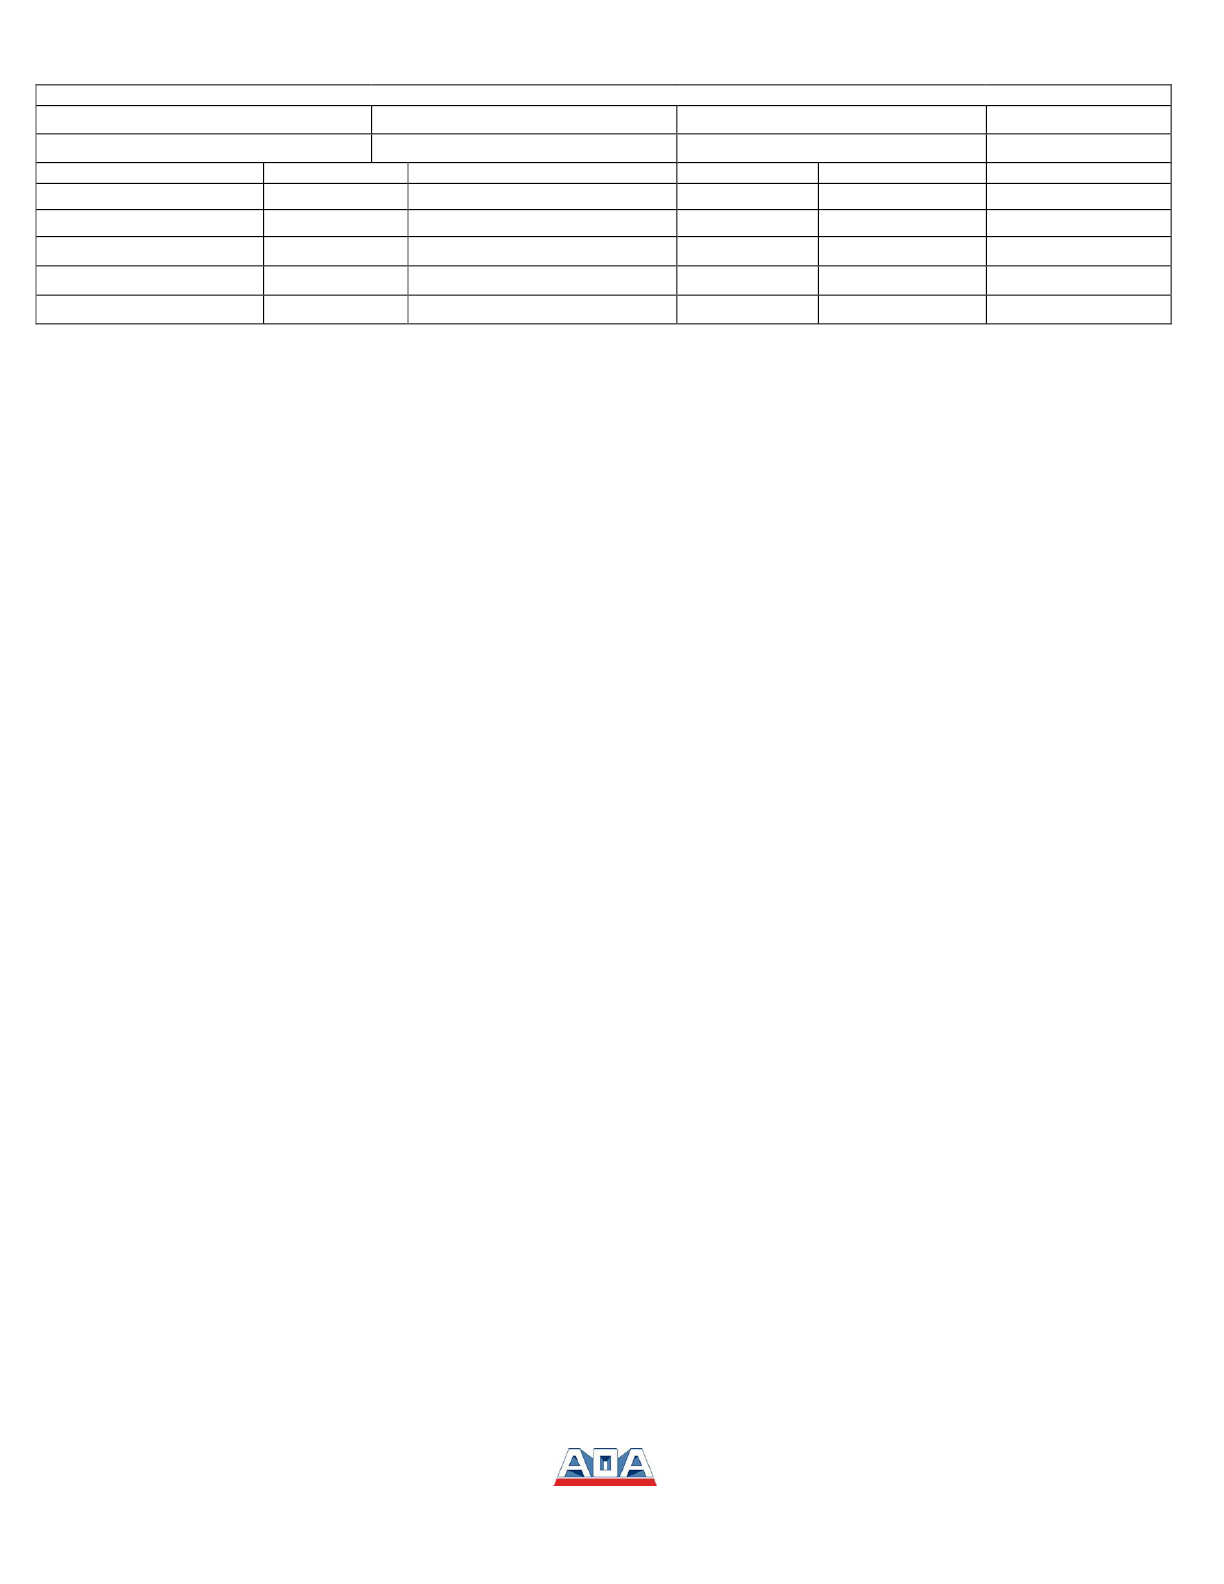 Lease Application Template 2